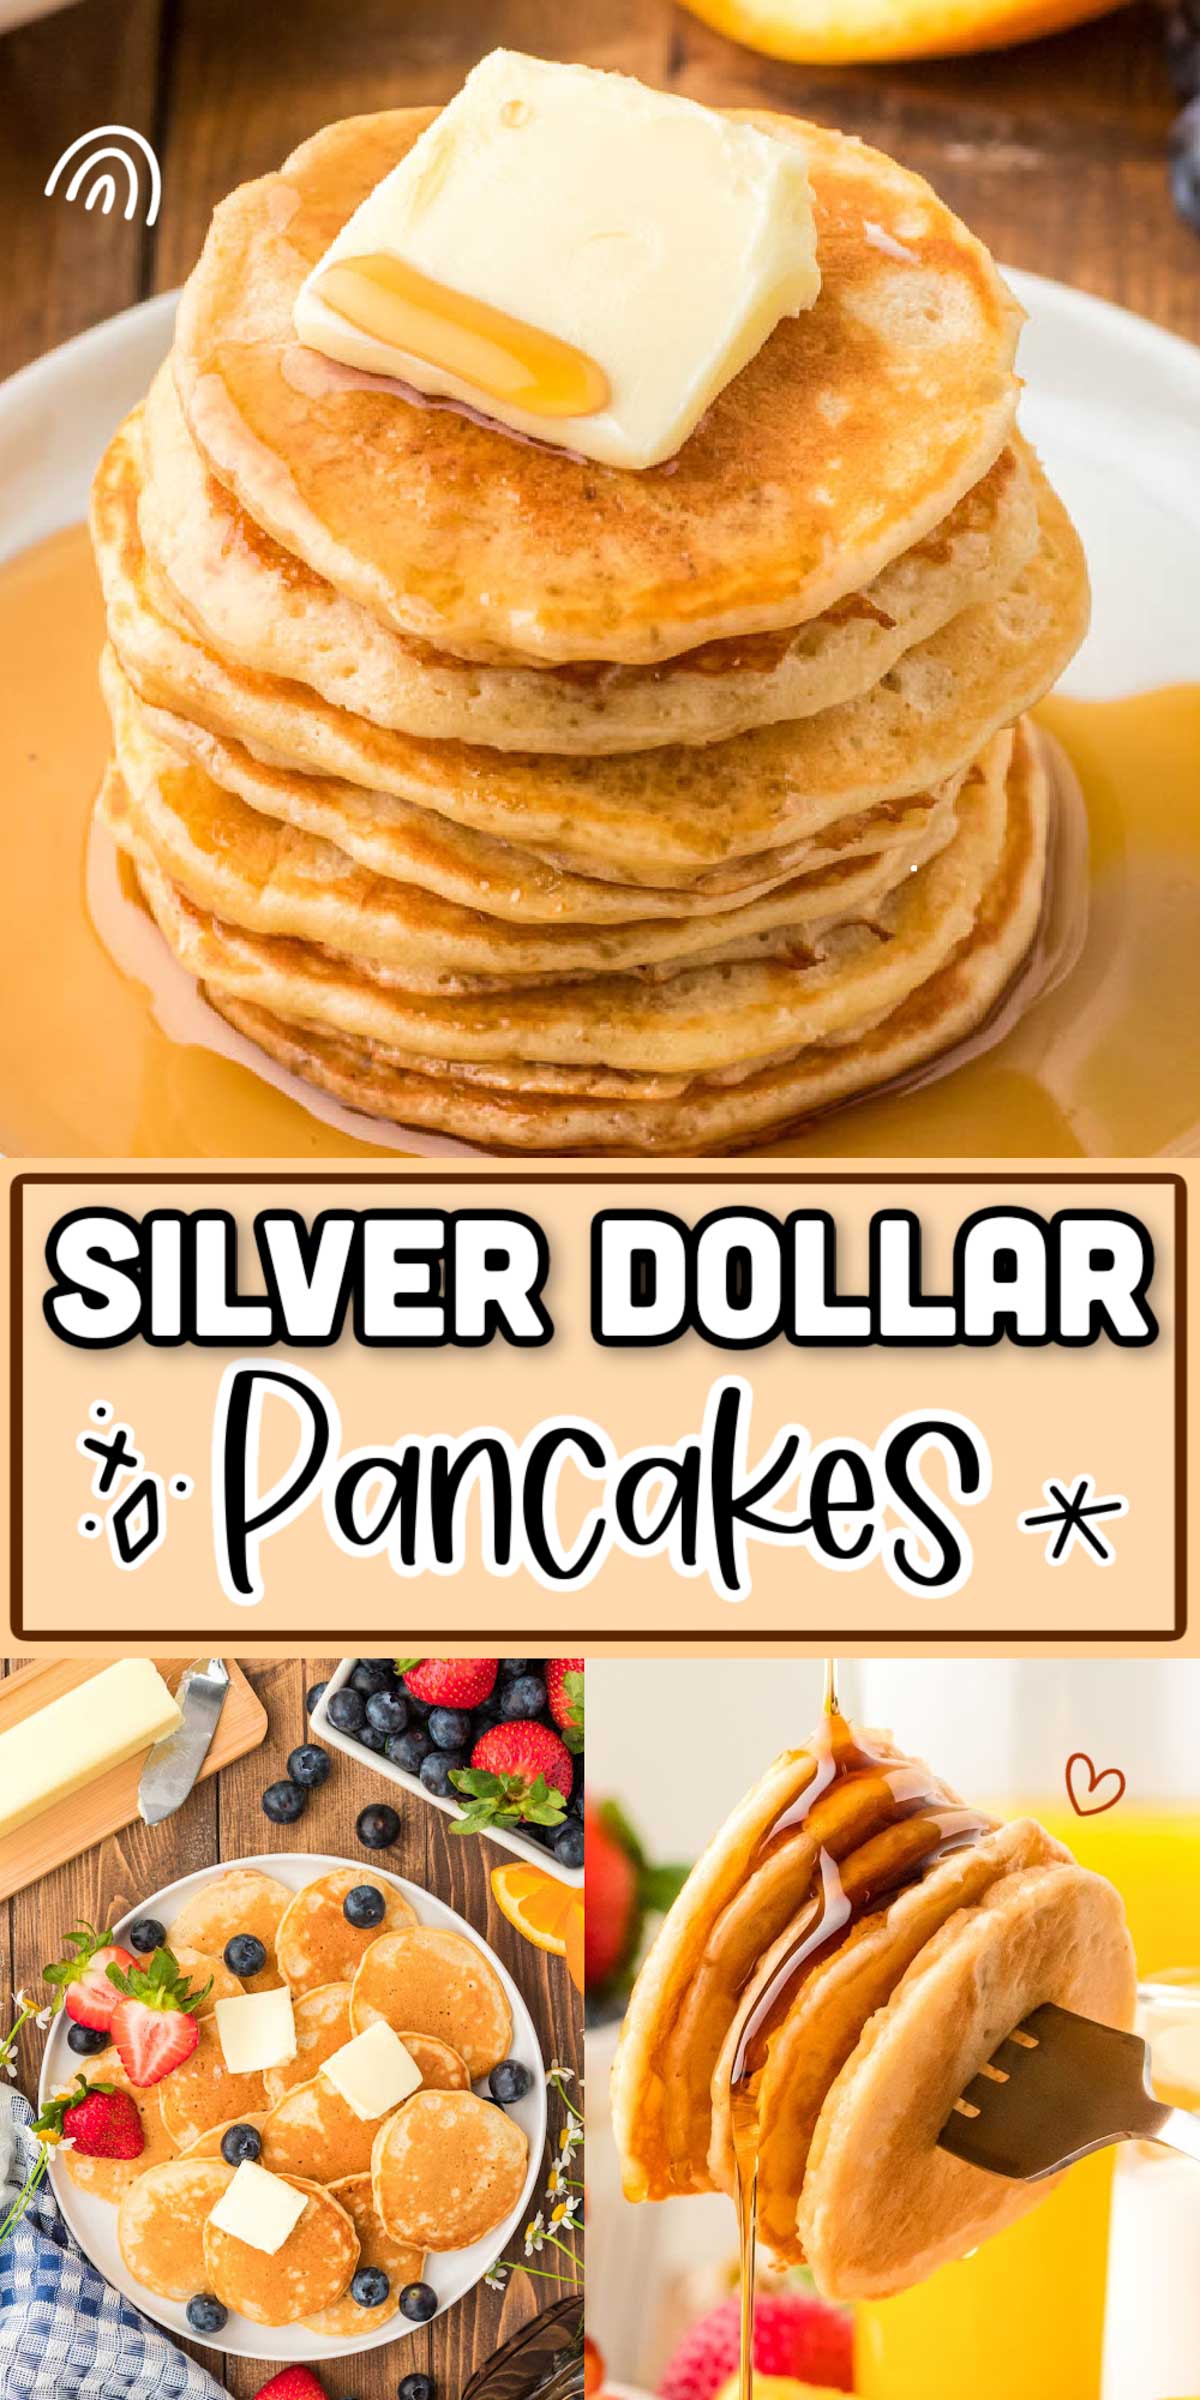 These Silver Dollar Pancakes are delicious, fluffy mini pancakes that are made with easy ingredients in only 30 minutes! A simple recipe that serves up two dozen bite-sized pancakes! via @sugarandsoulco